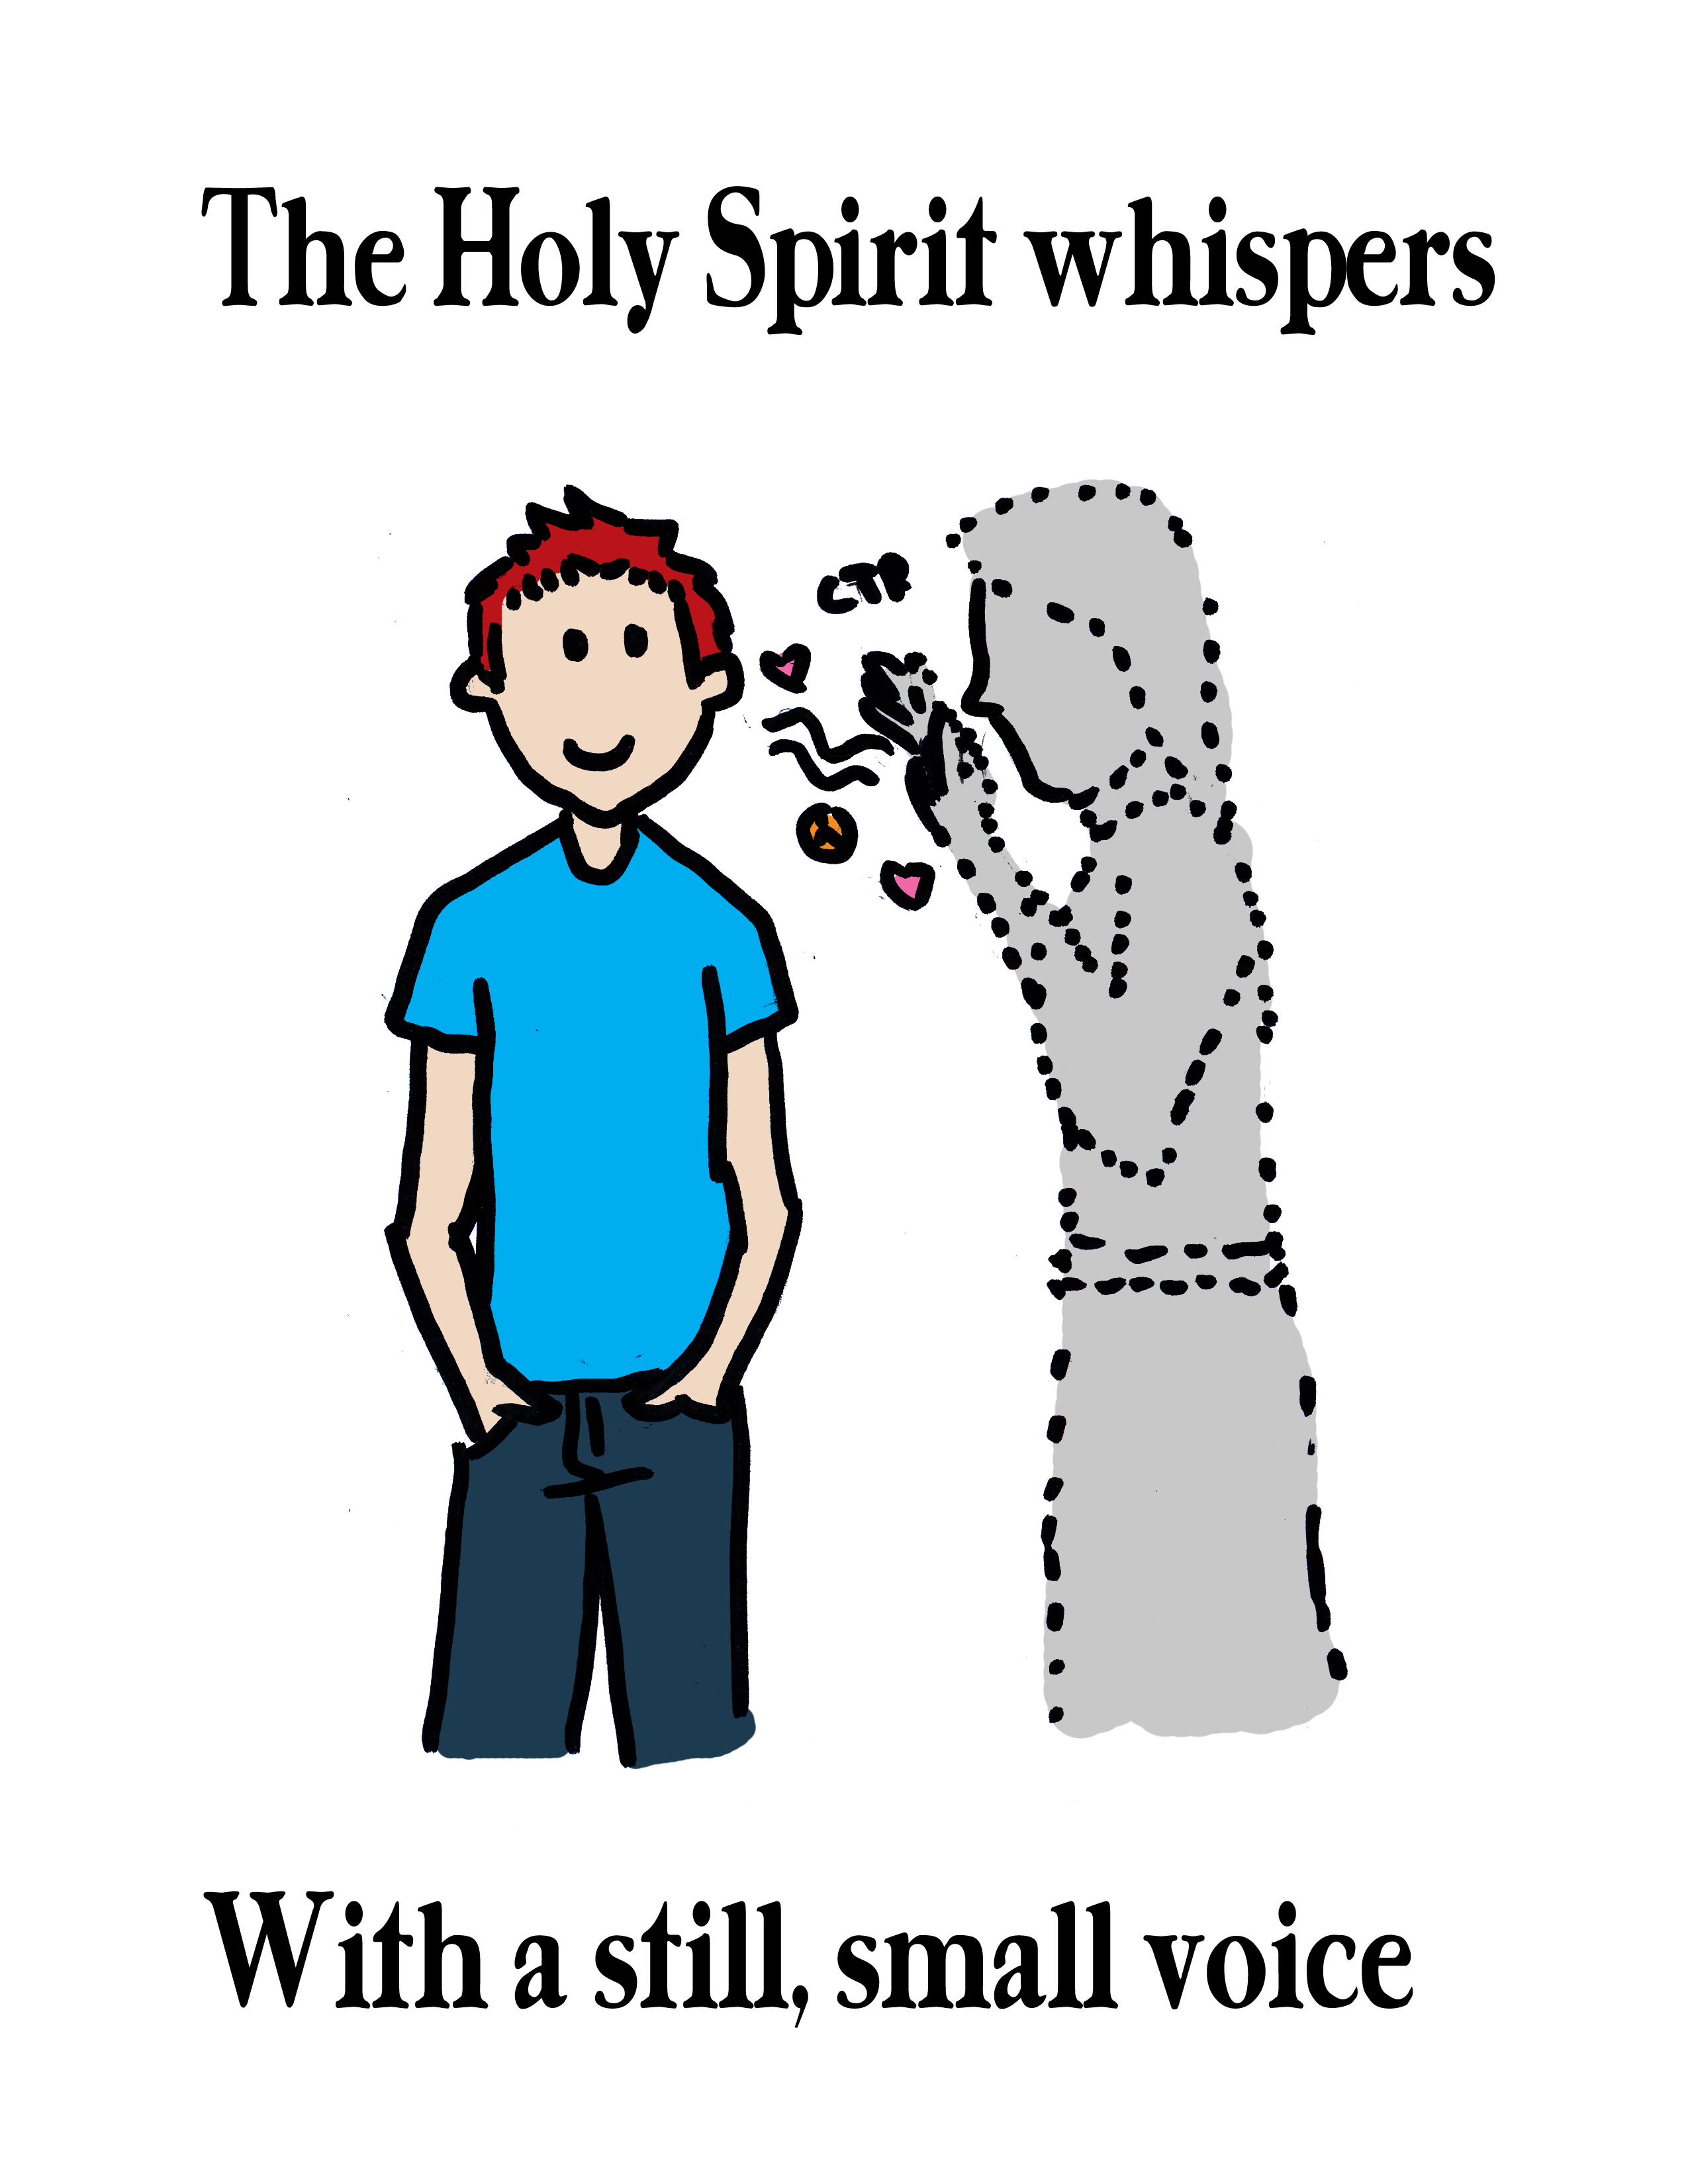 whispering voice clipart image